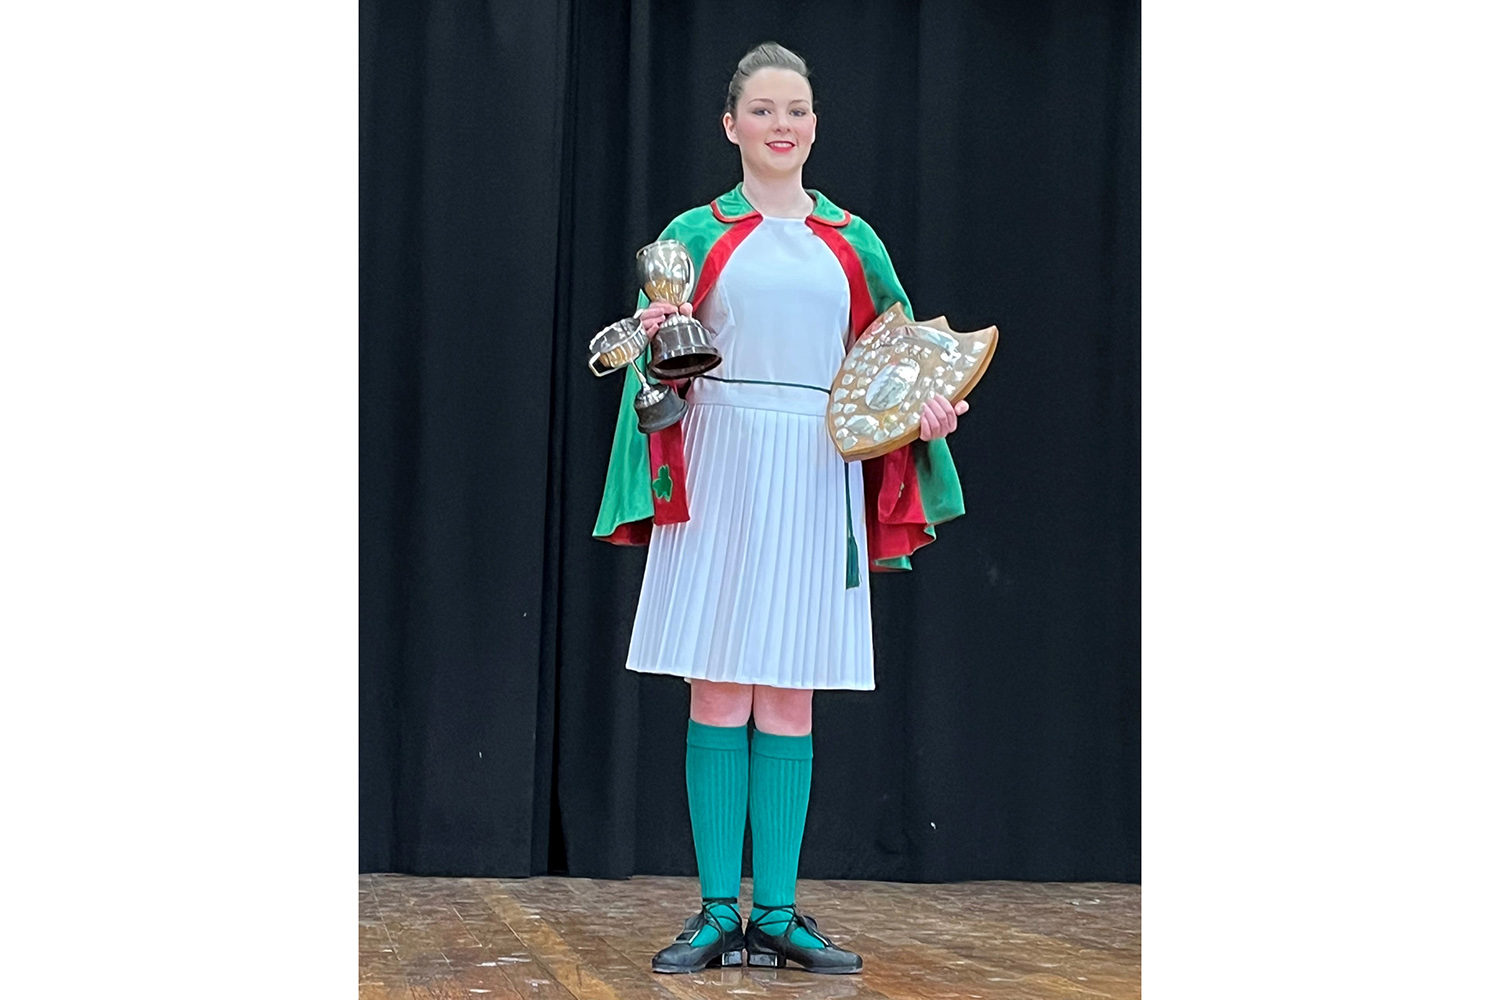 St Andrew's College student Hayley Nolan received many accolades for Highland Dancing.